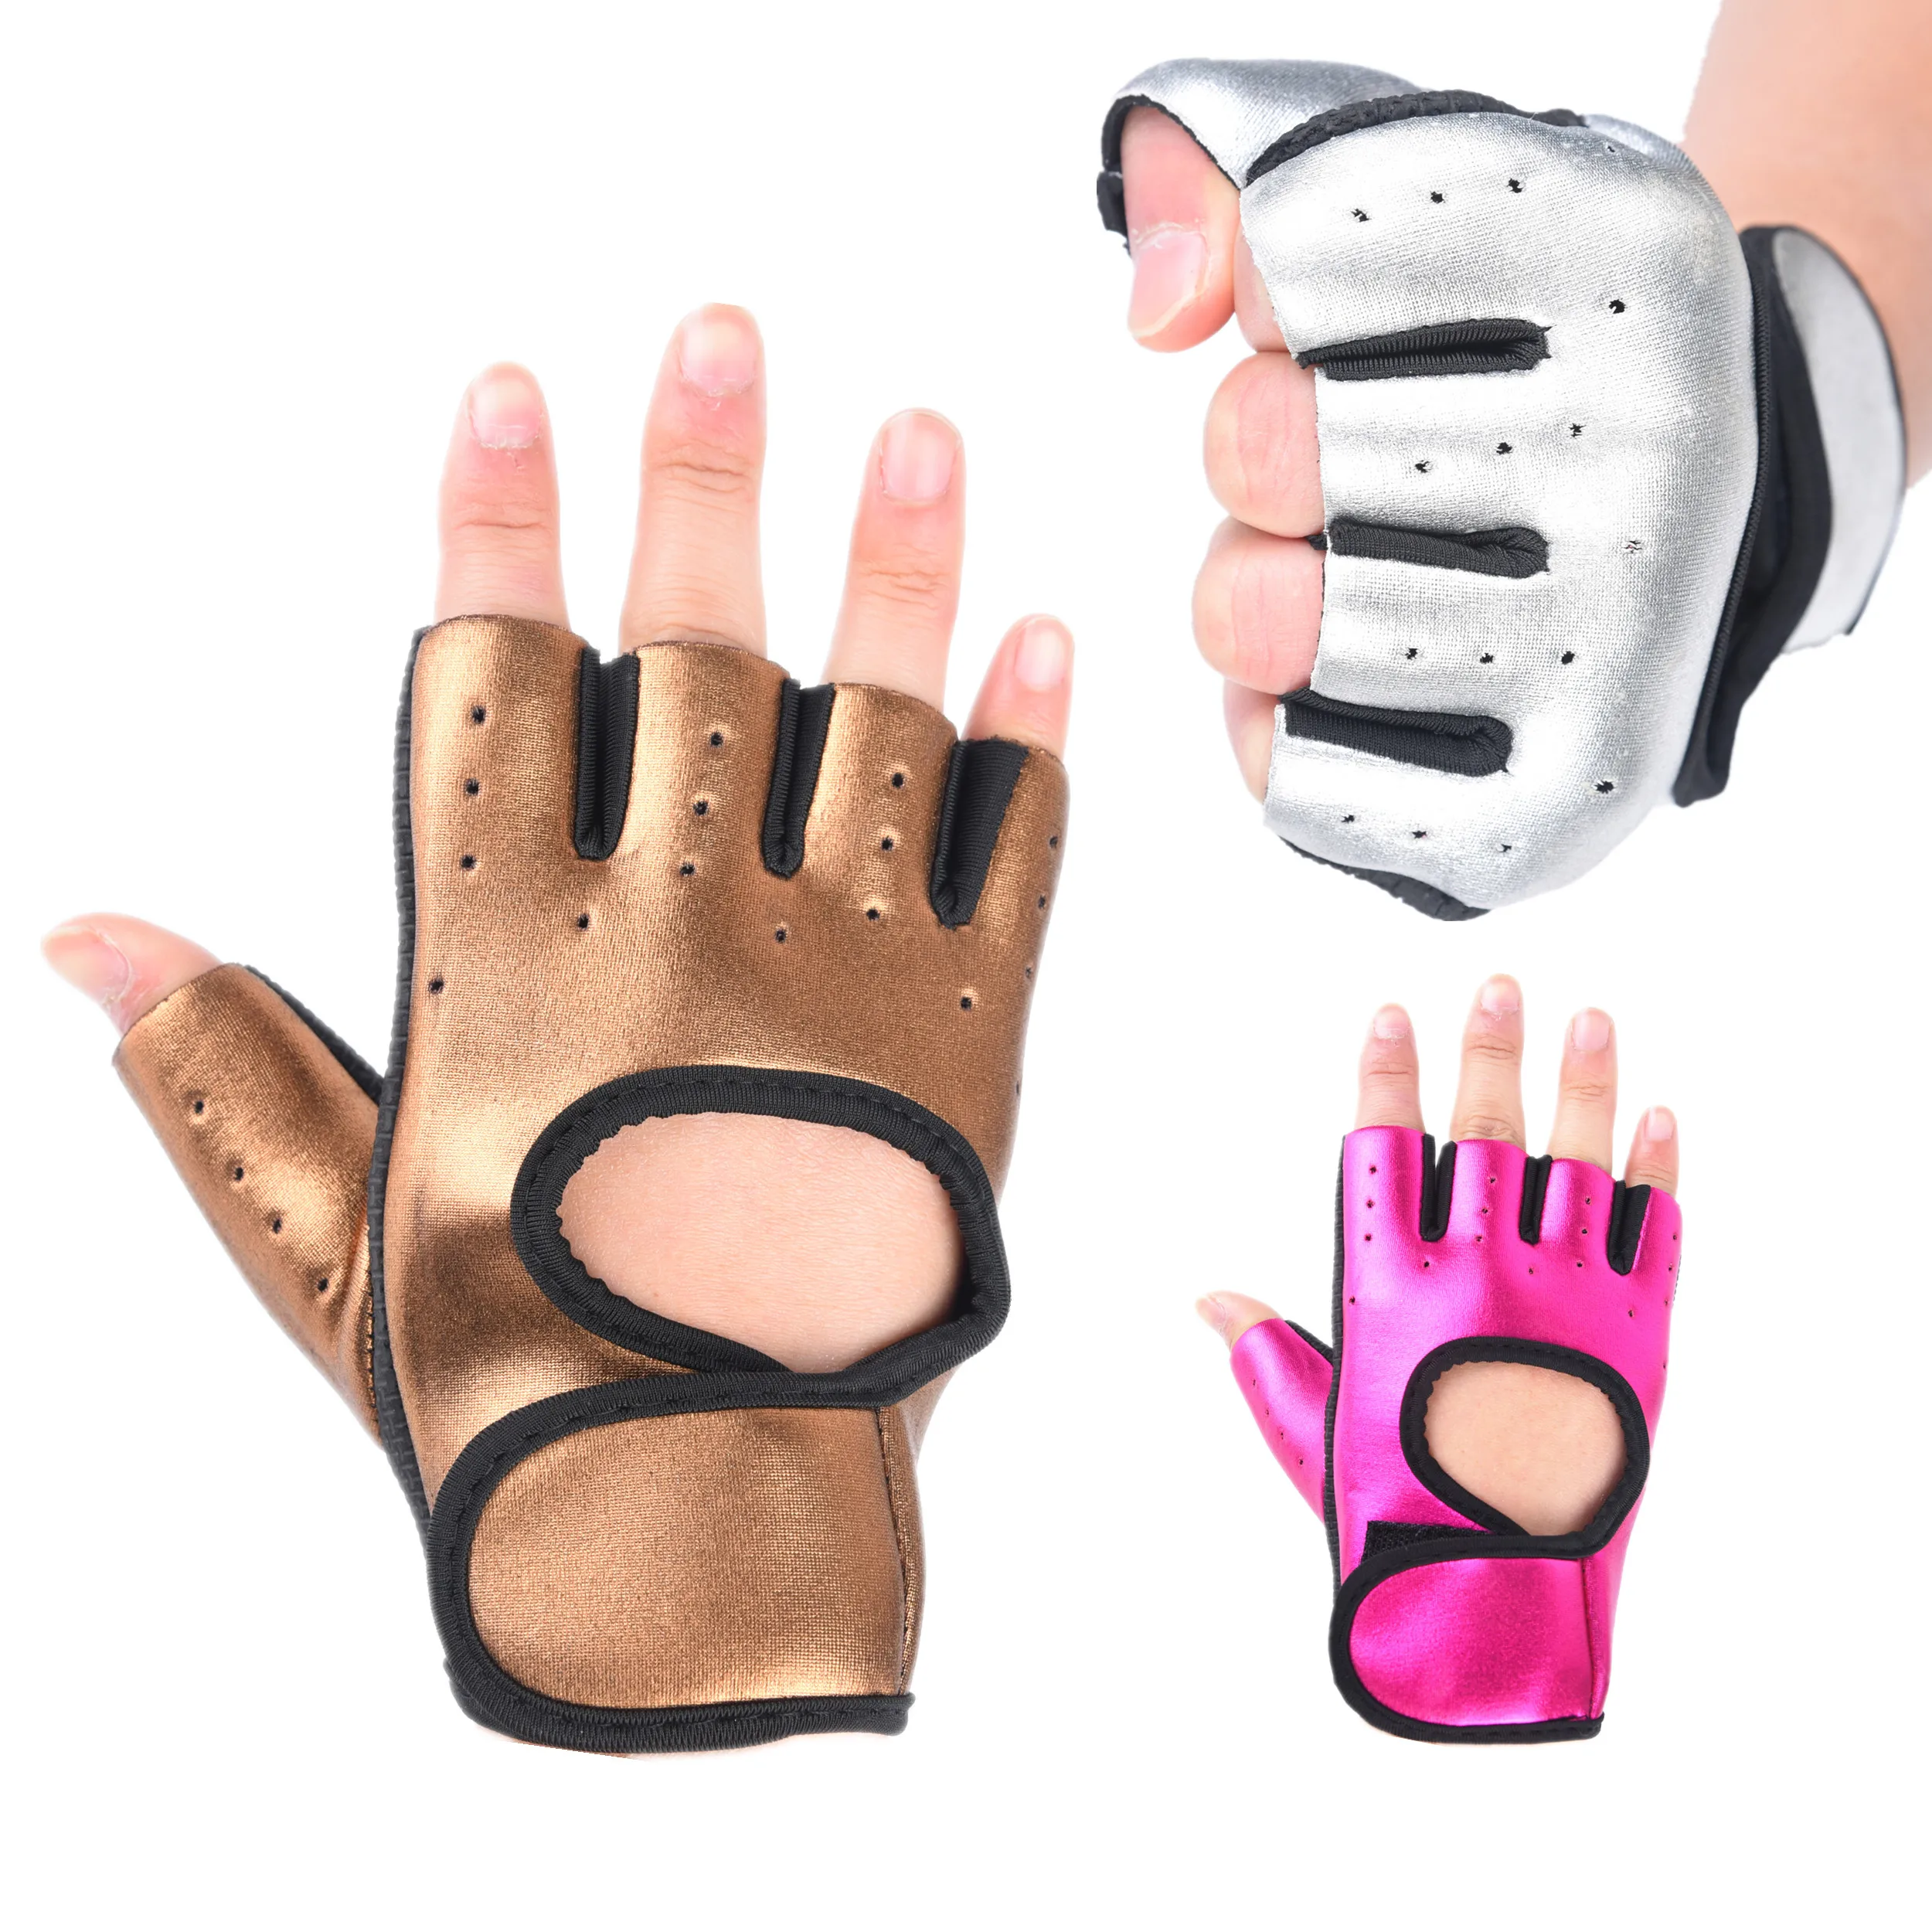 High quality touch screen cycling deerskin leather garden gloves Leather cycle g love racing gloves